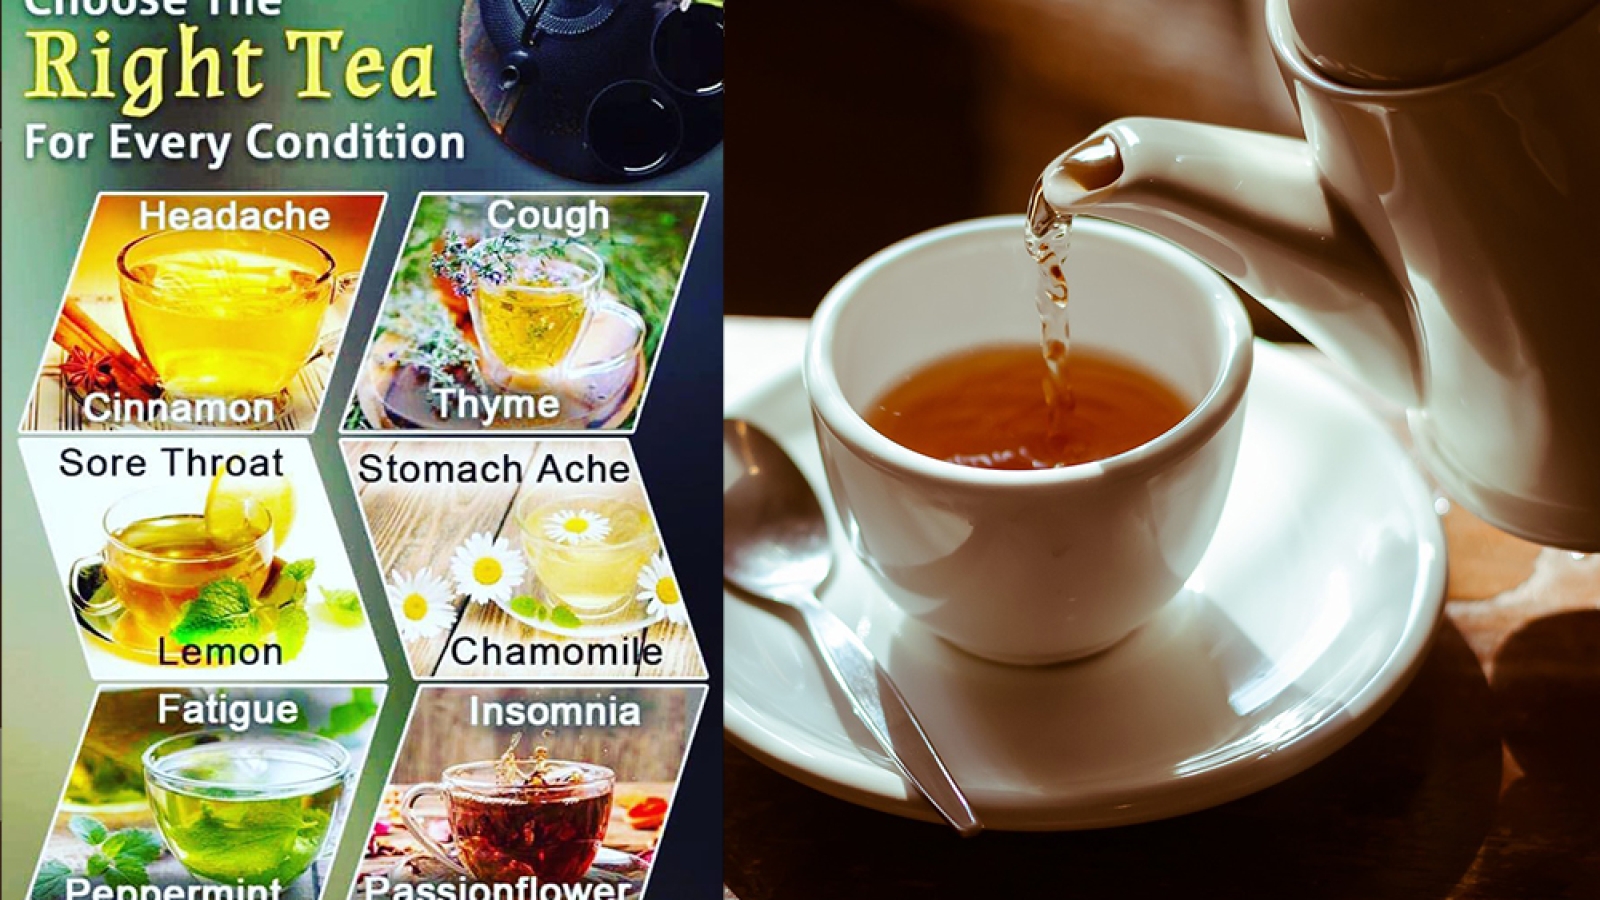 Choose-The-Right-Tea-For-Every-Condition-BLOG